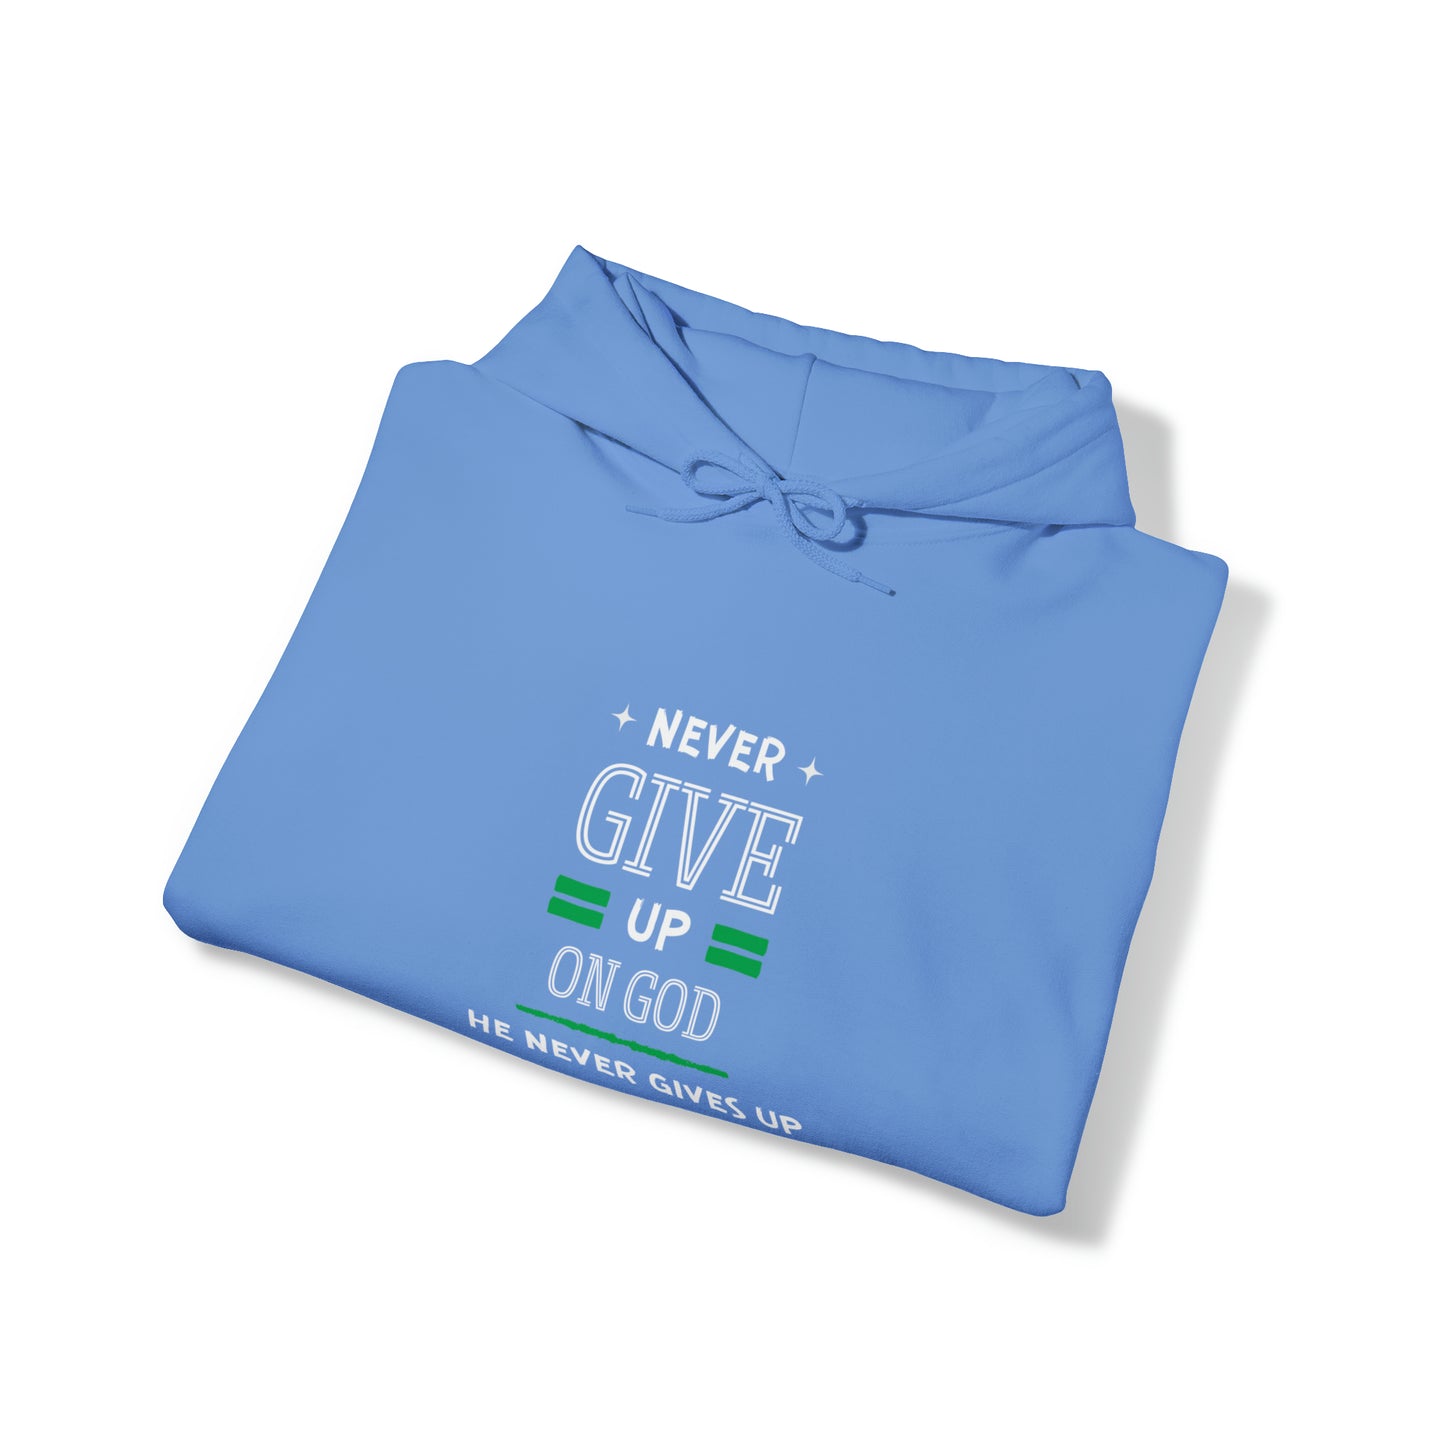 Never Give Up On God He Never Gives Up On You Unisex Hooded Sweatshirt Printify